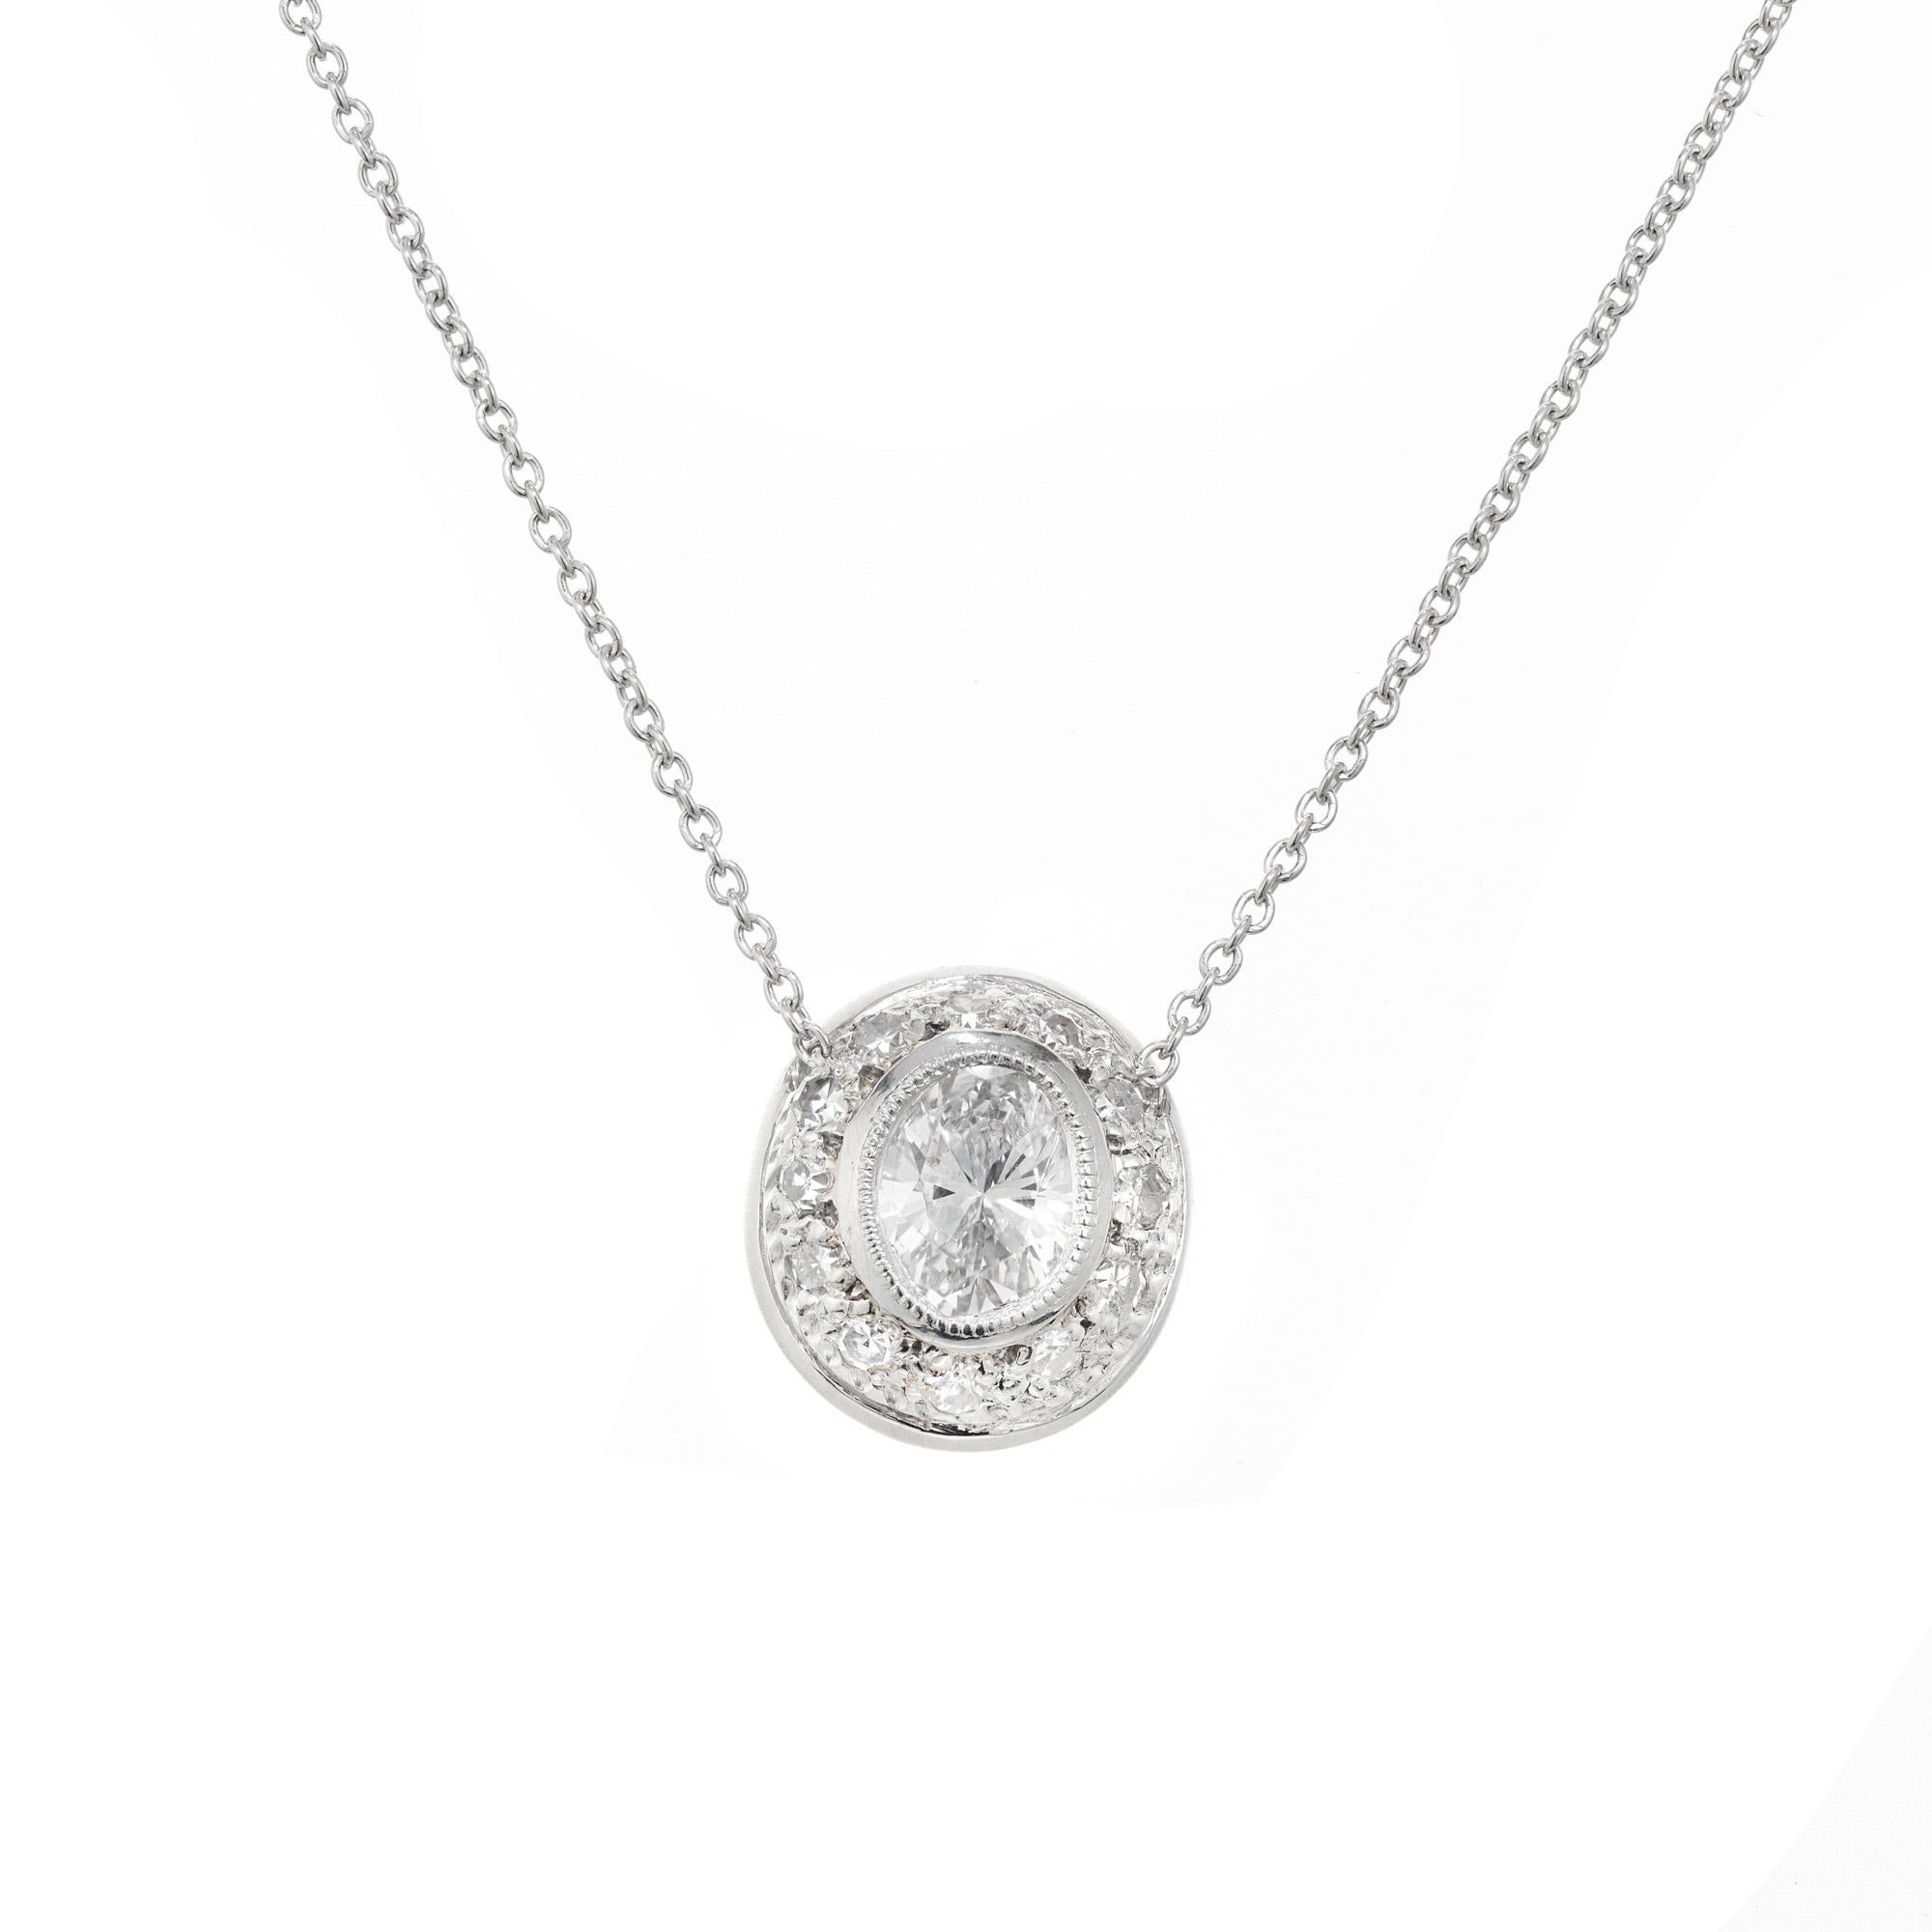 Antique style diamond slide pendant necklace. Created in the Peter Suchy Workshop, antique inspired, this platinum domed pendant has a .49ct oval bezel set center diamond, accented with a halo of 12 round Pavé set diamonds. 16 inch platinum cable